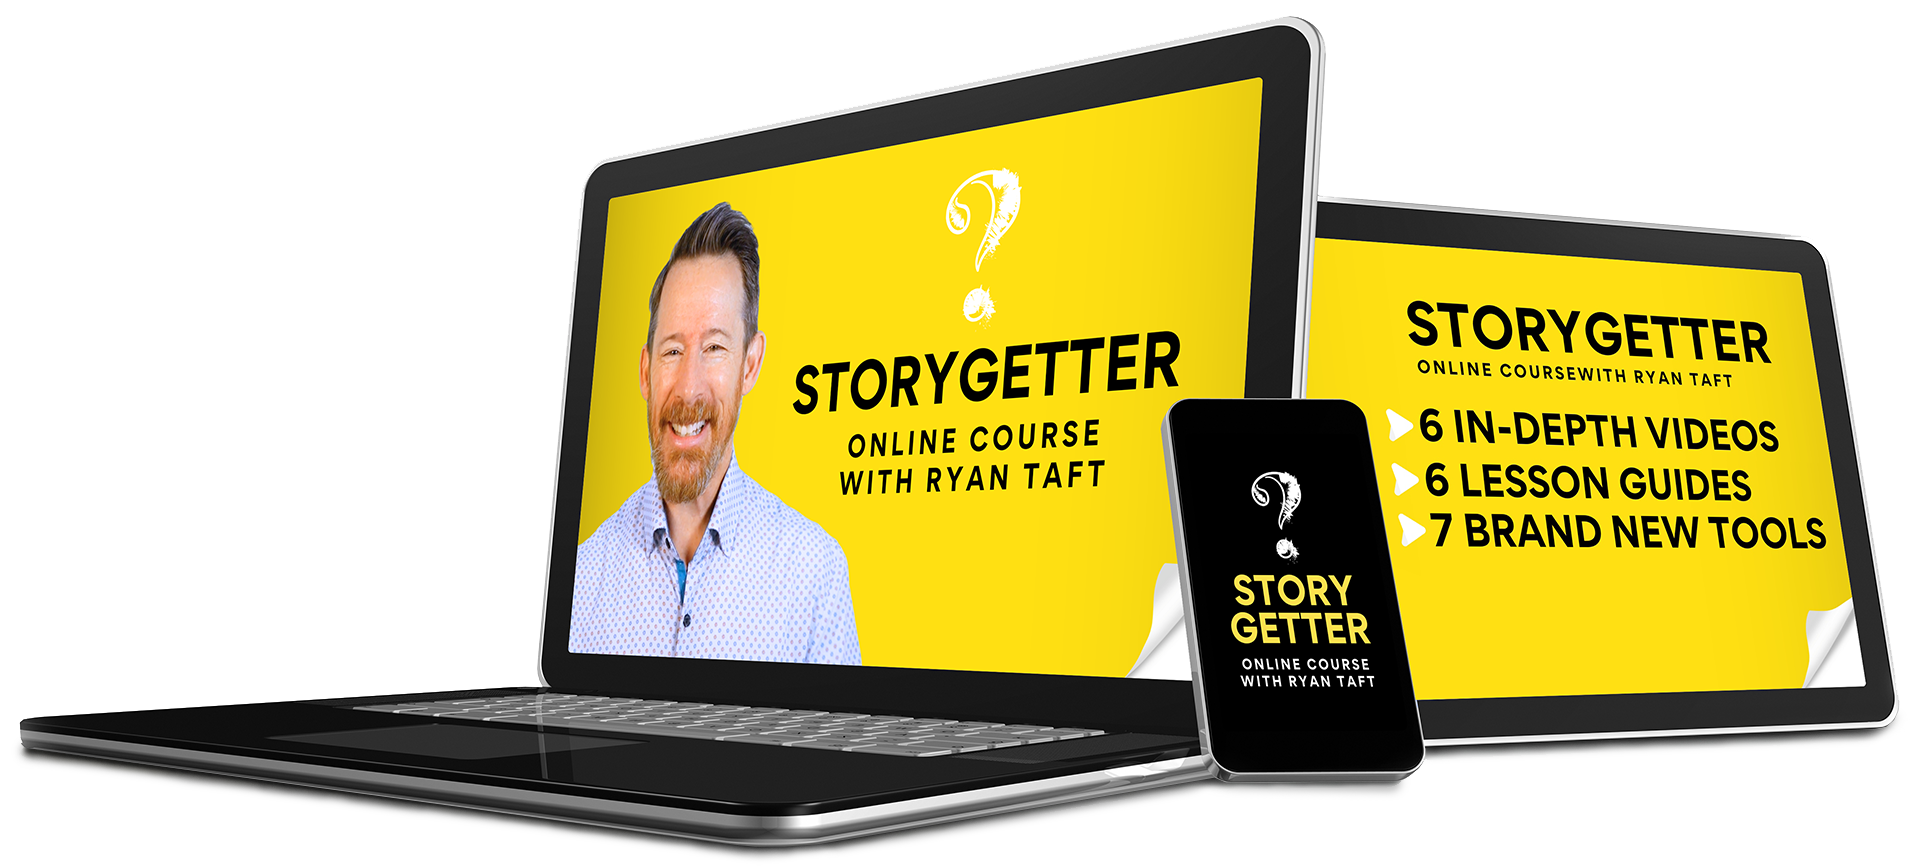 Storygetter Online Course